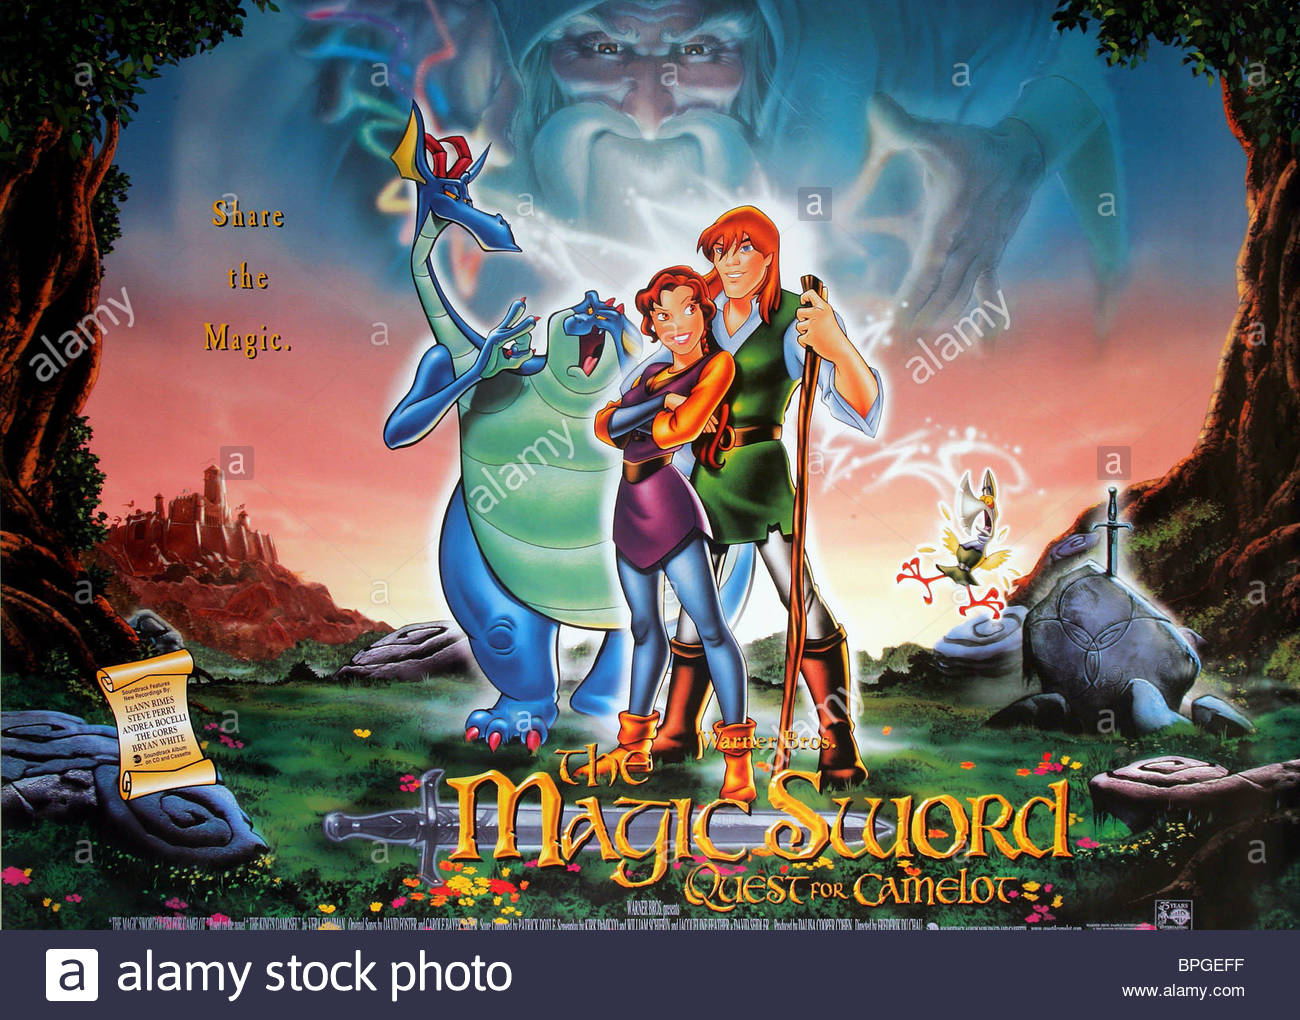 Quest For Camelot #4